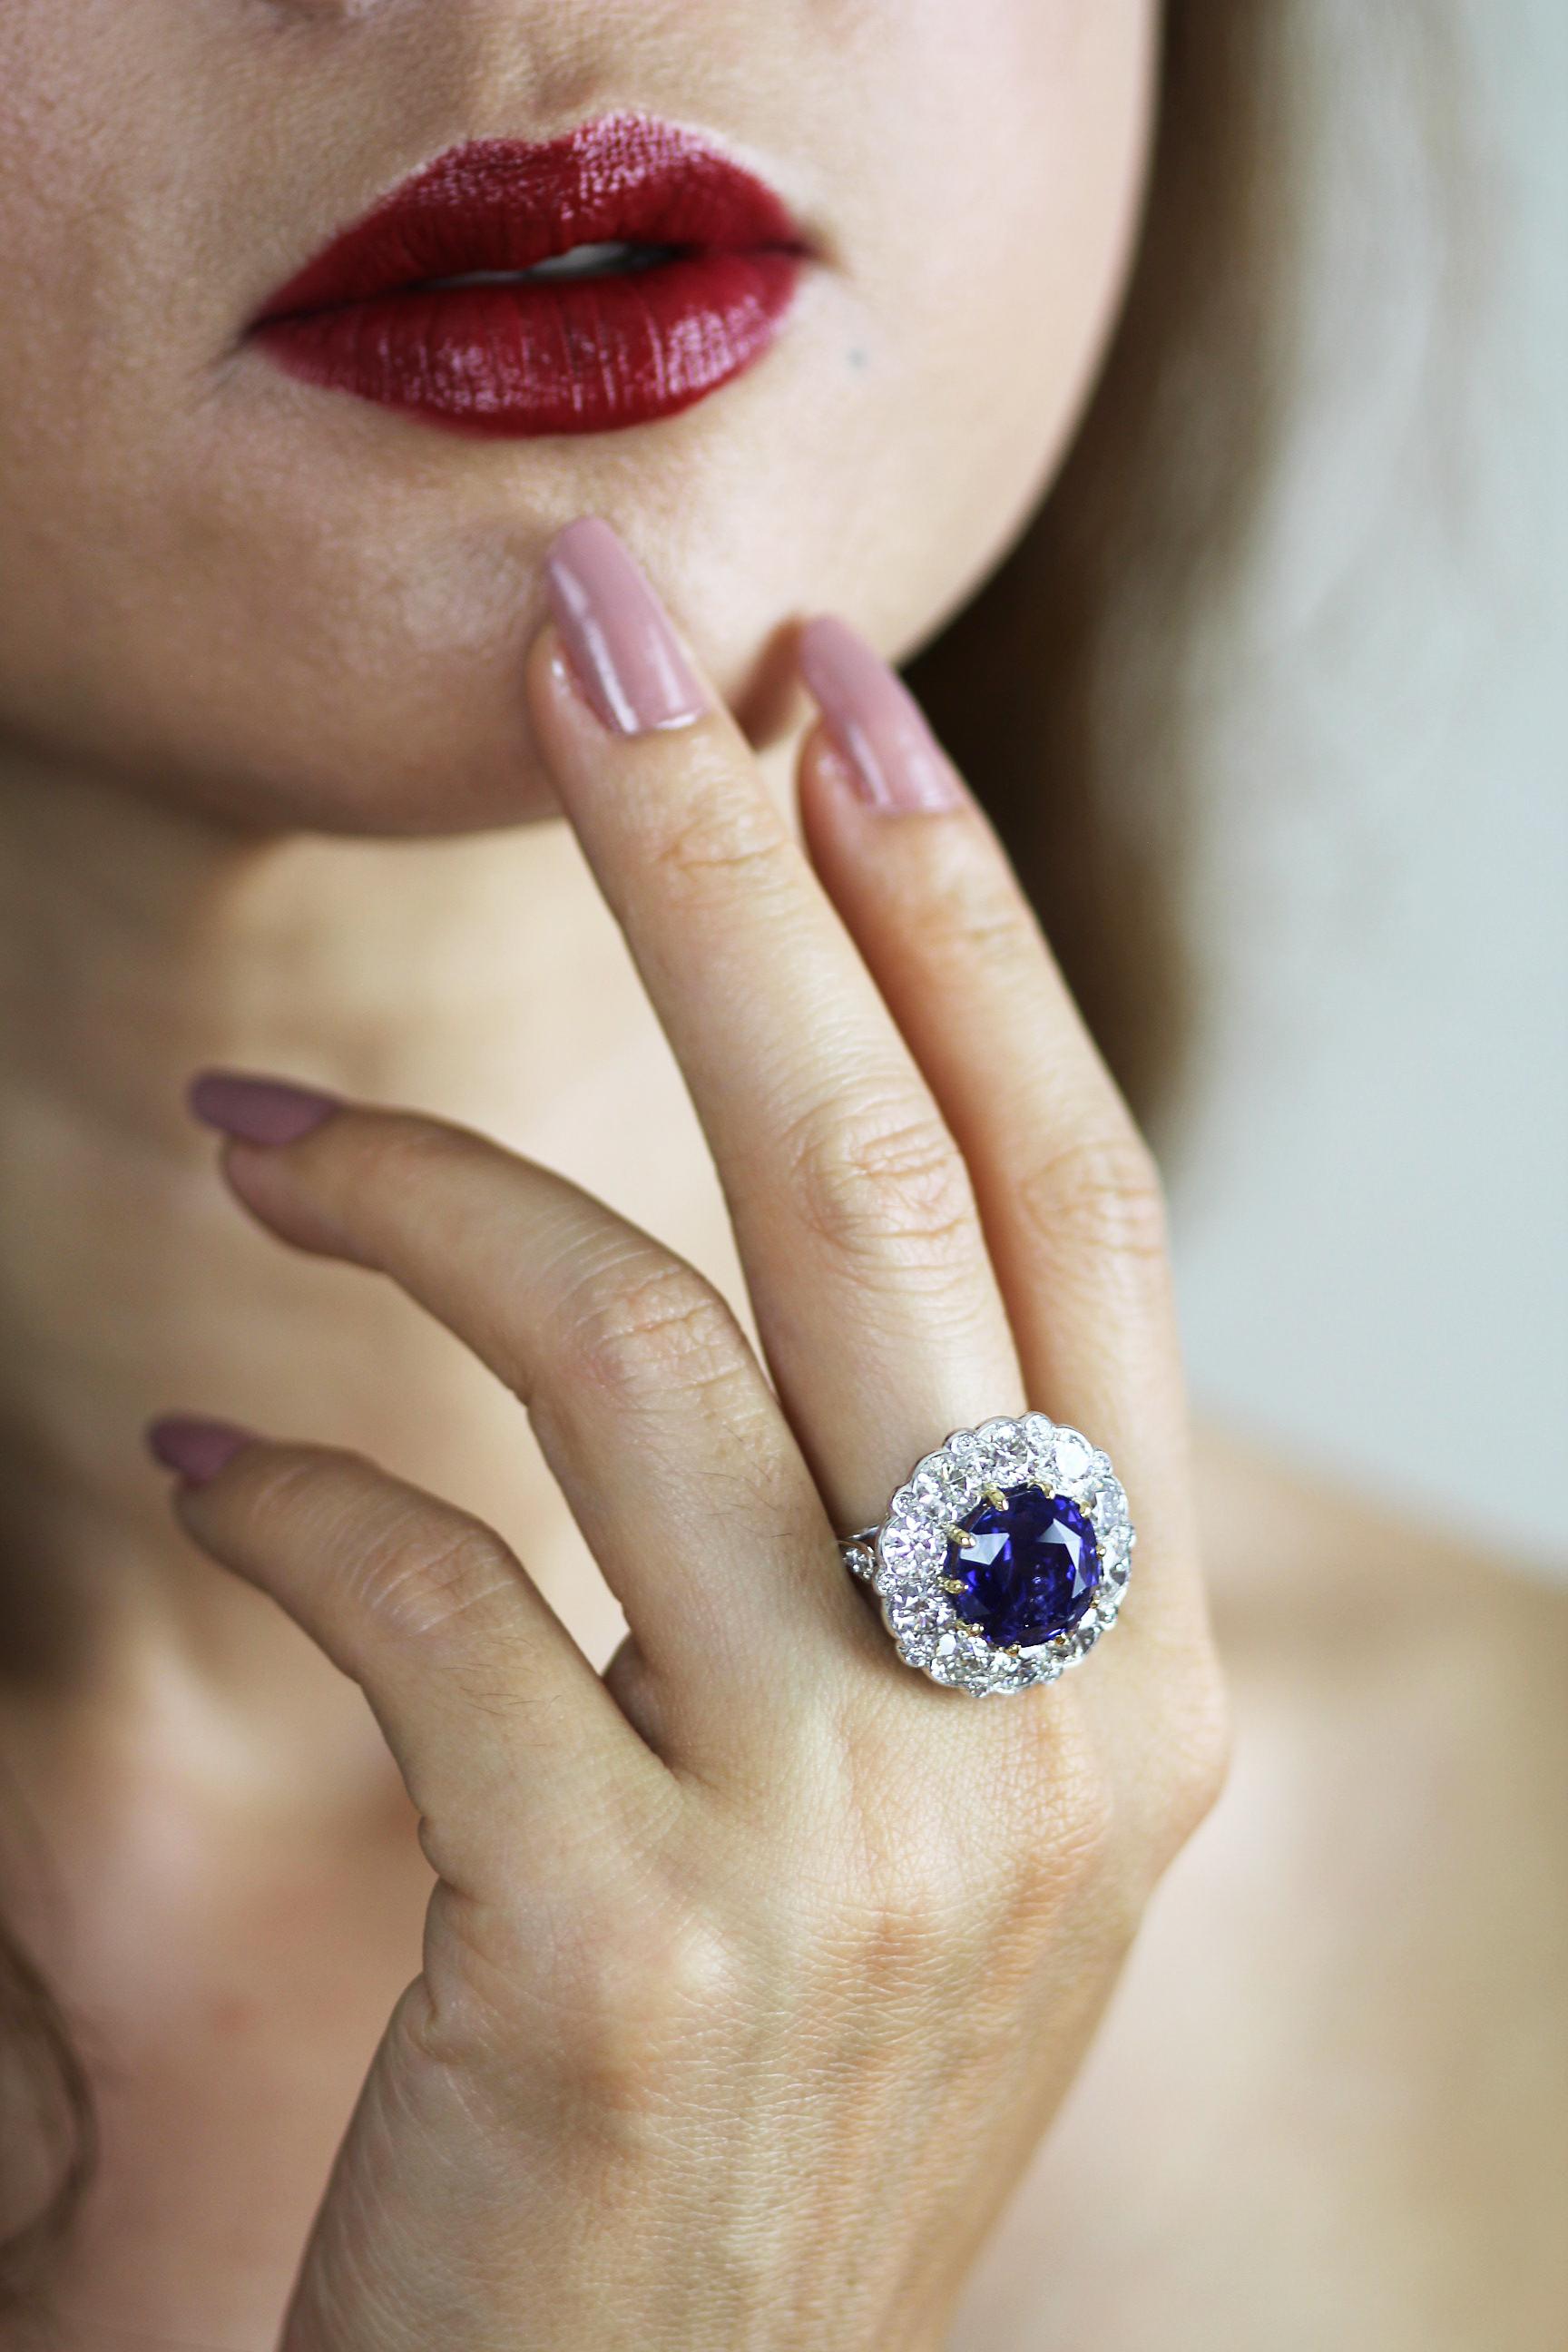 Sapphire and diamond ring set in platinum. Centering a bold powerful royal blue sapphire, surrounded by round brilliant diamonds on a raised platform to resemble a flower.
1 x Sapphire, square cushion shape with The Gem & Pearl Laboratory